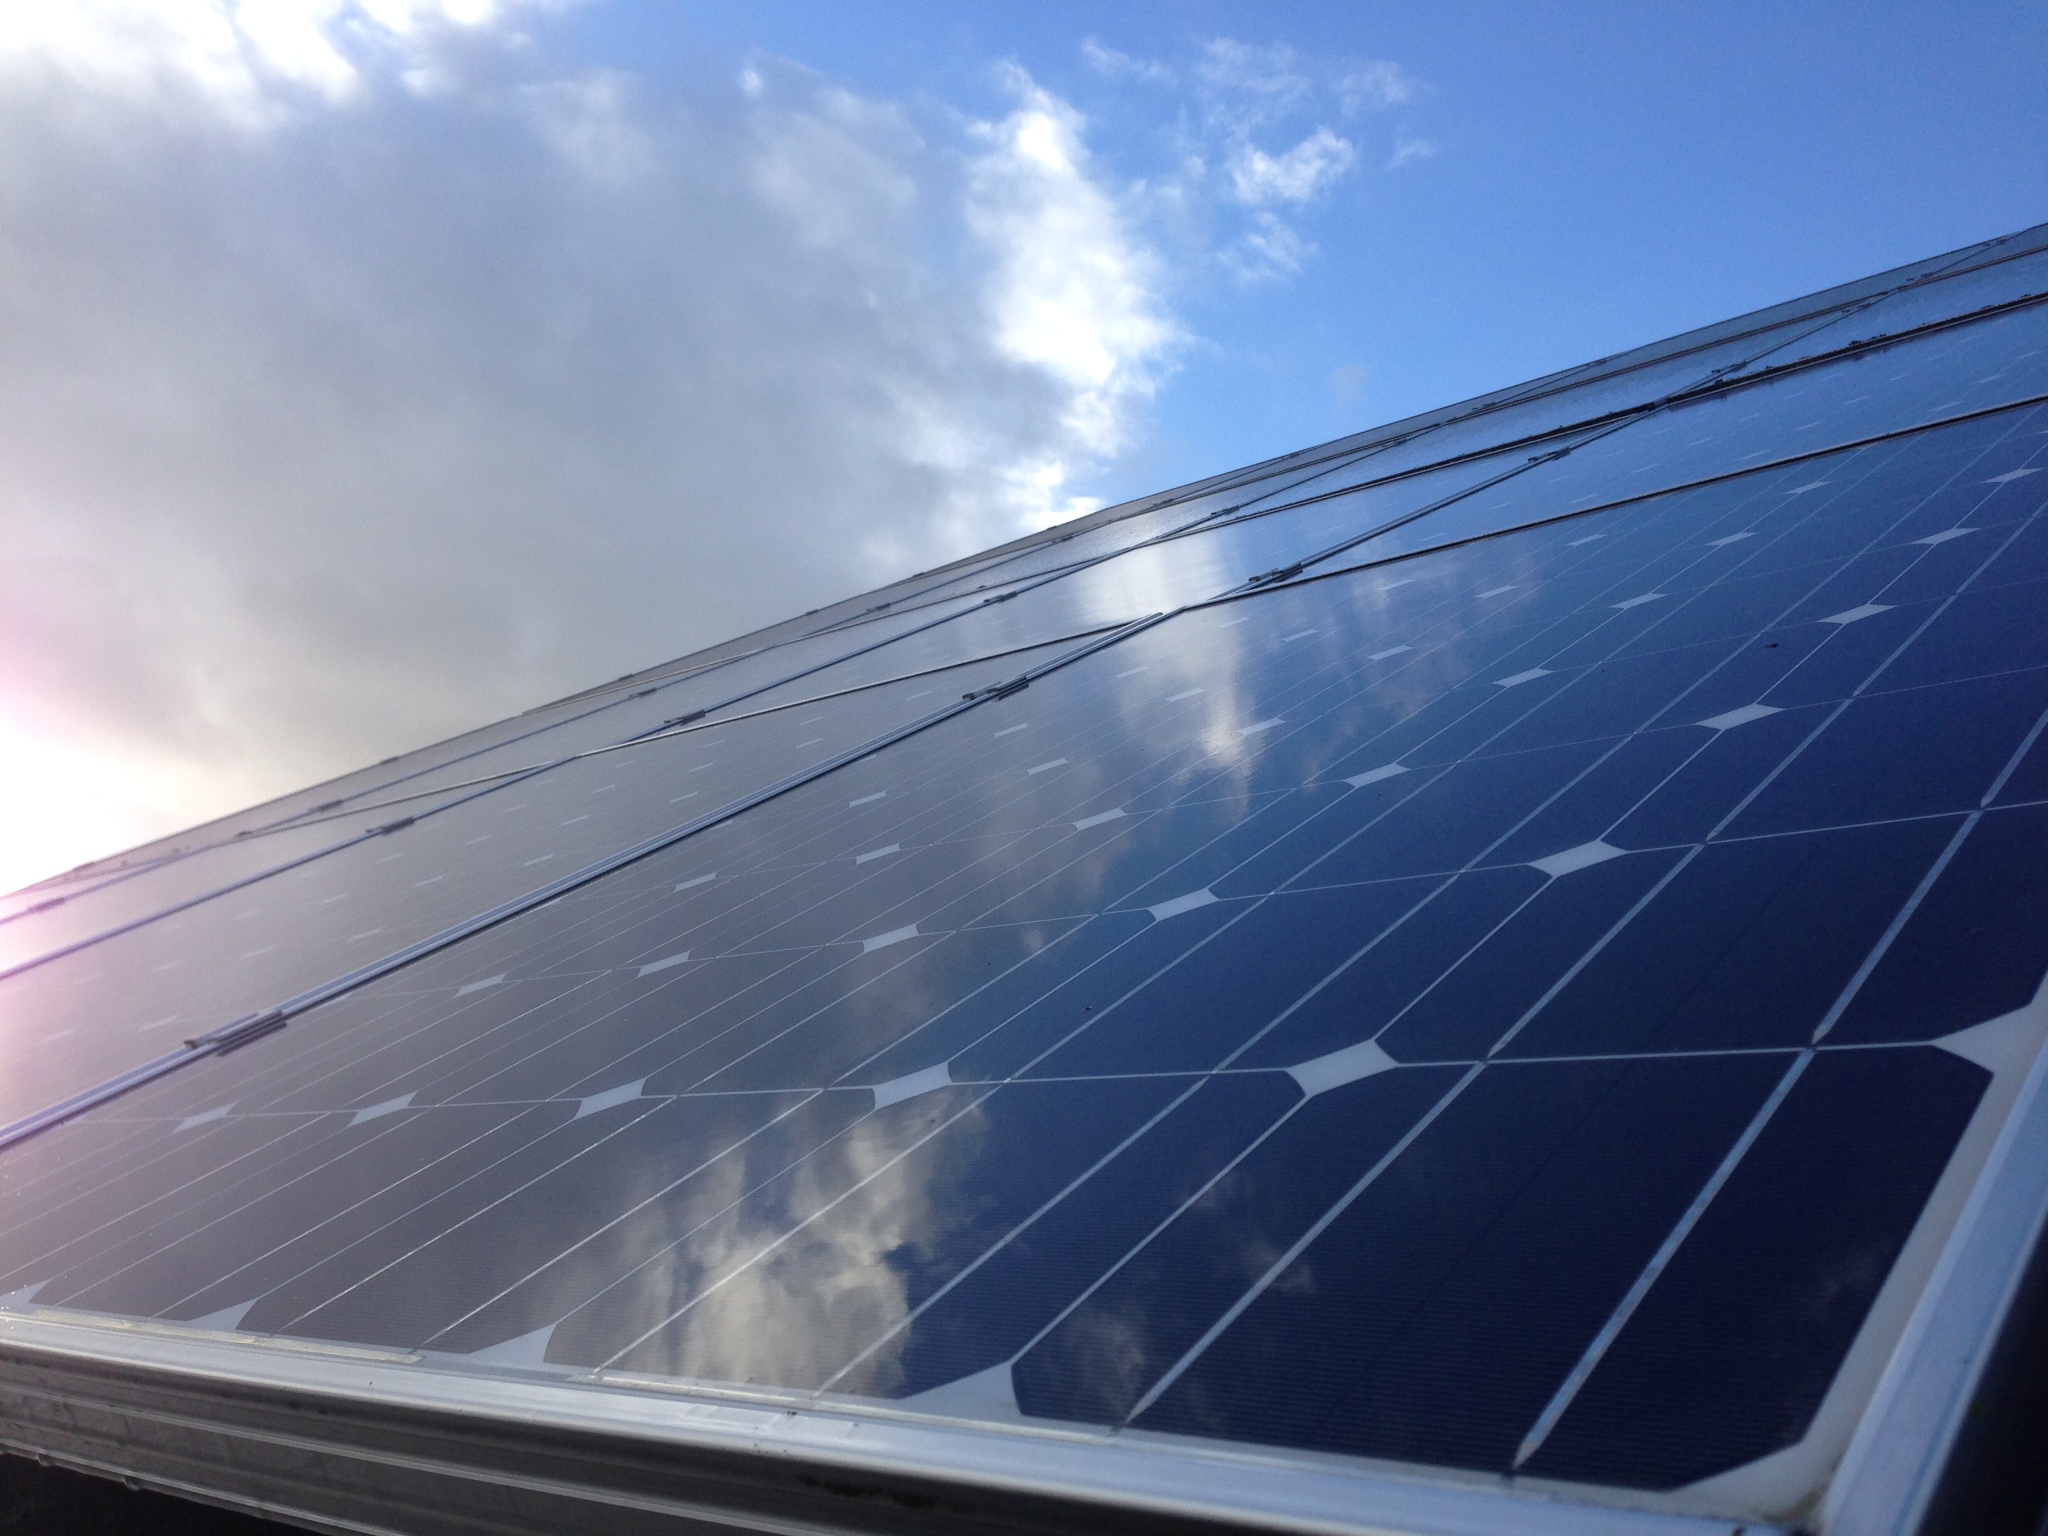  solar panel cleaning   REQUEST A QUOTATION  